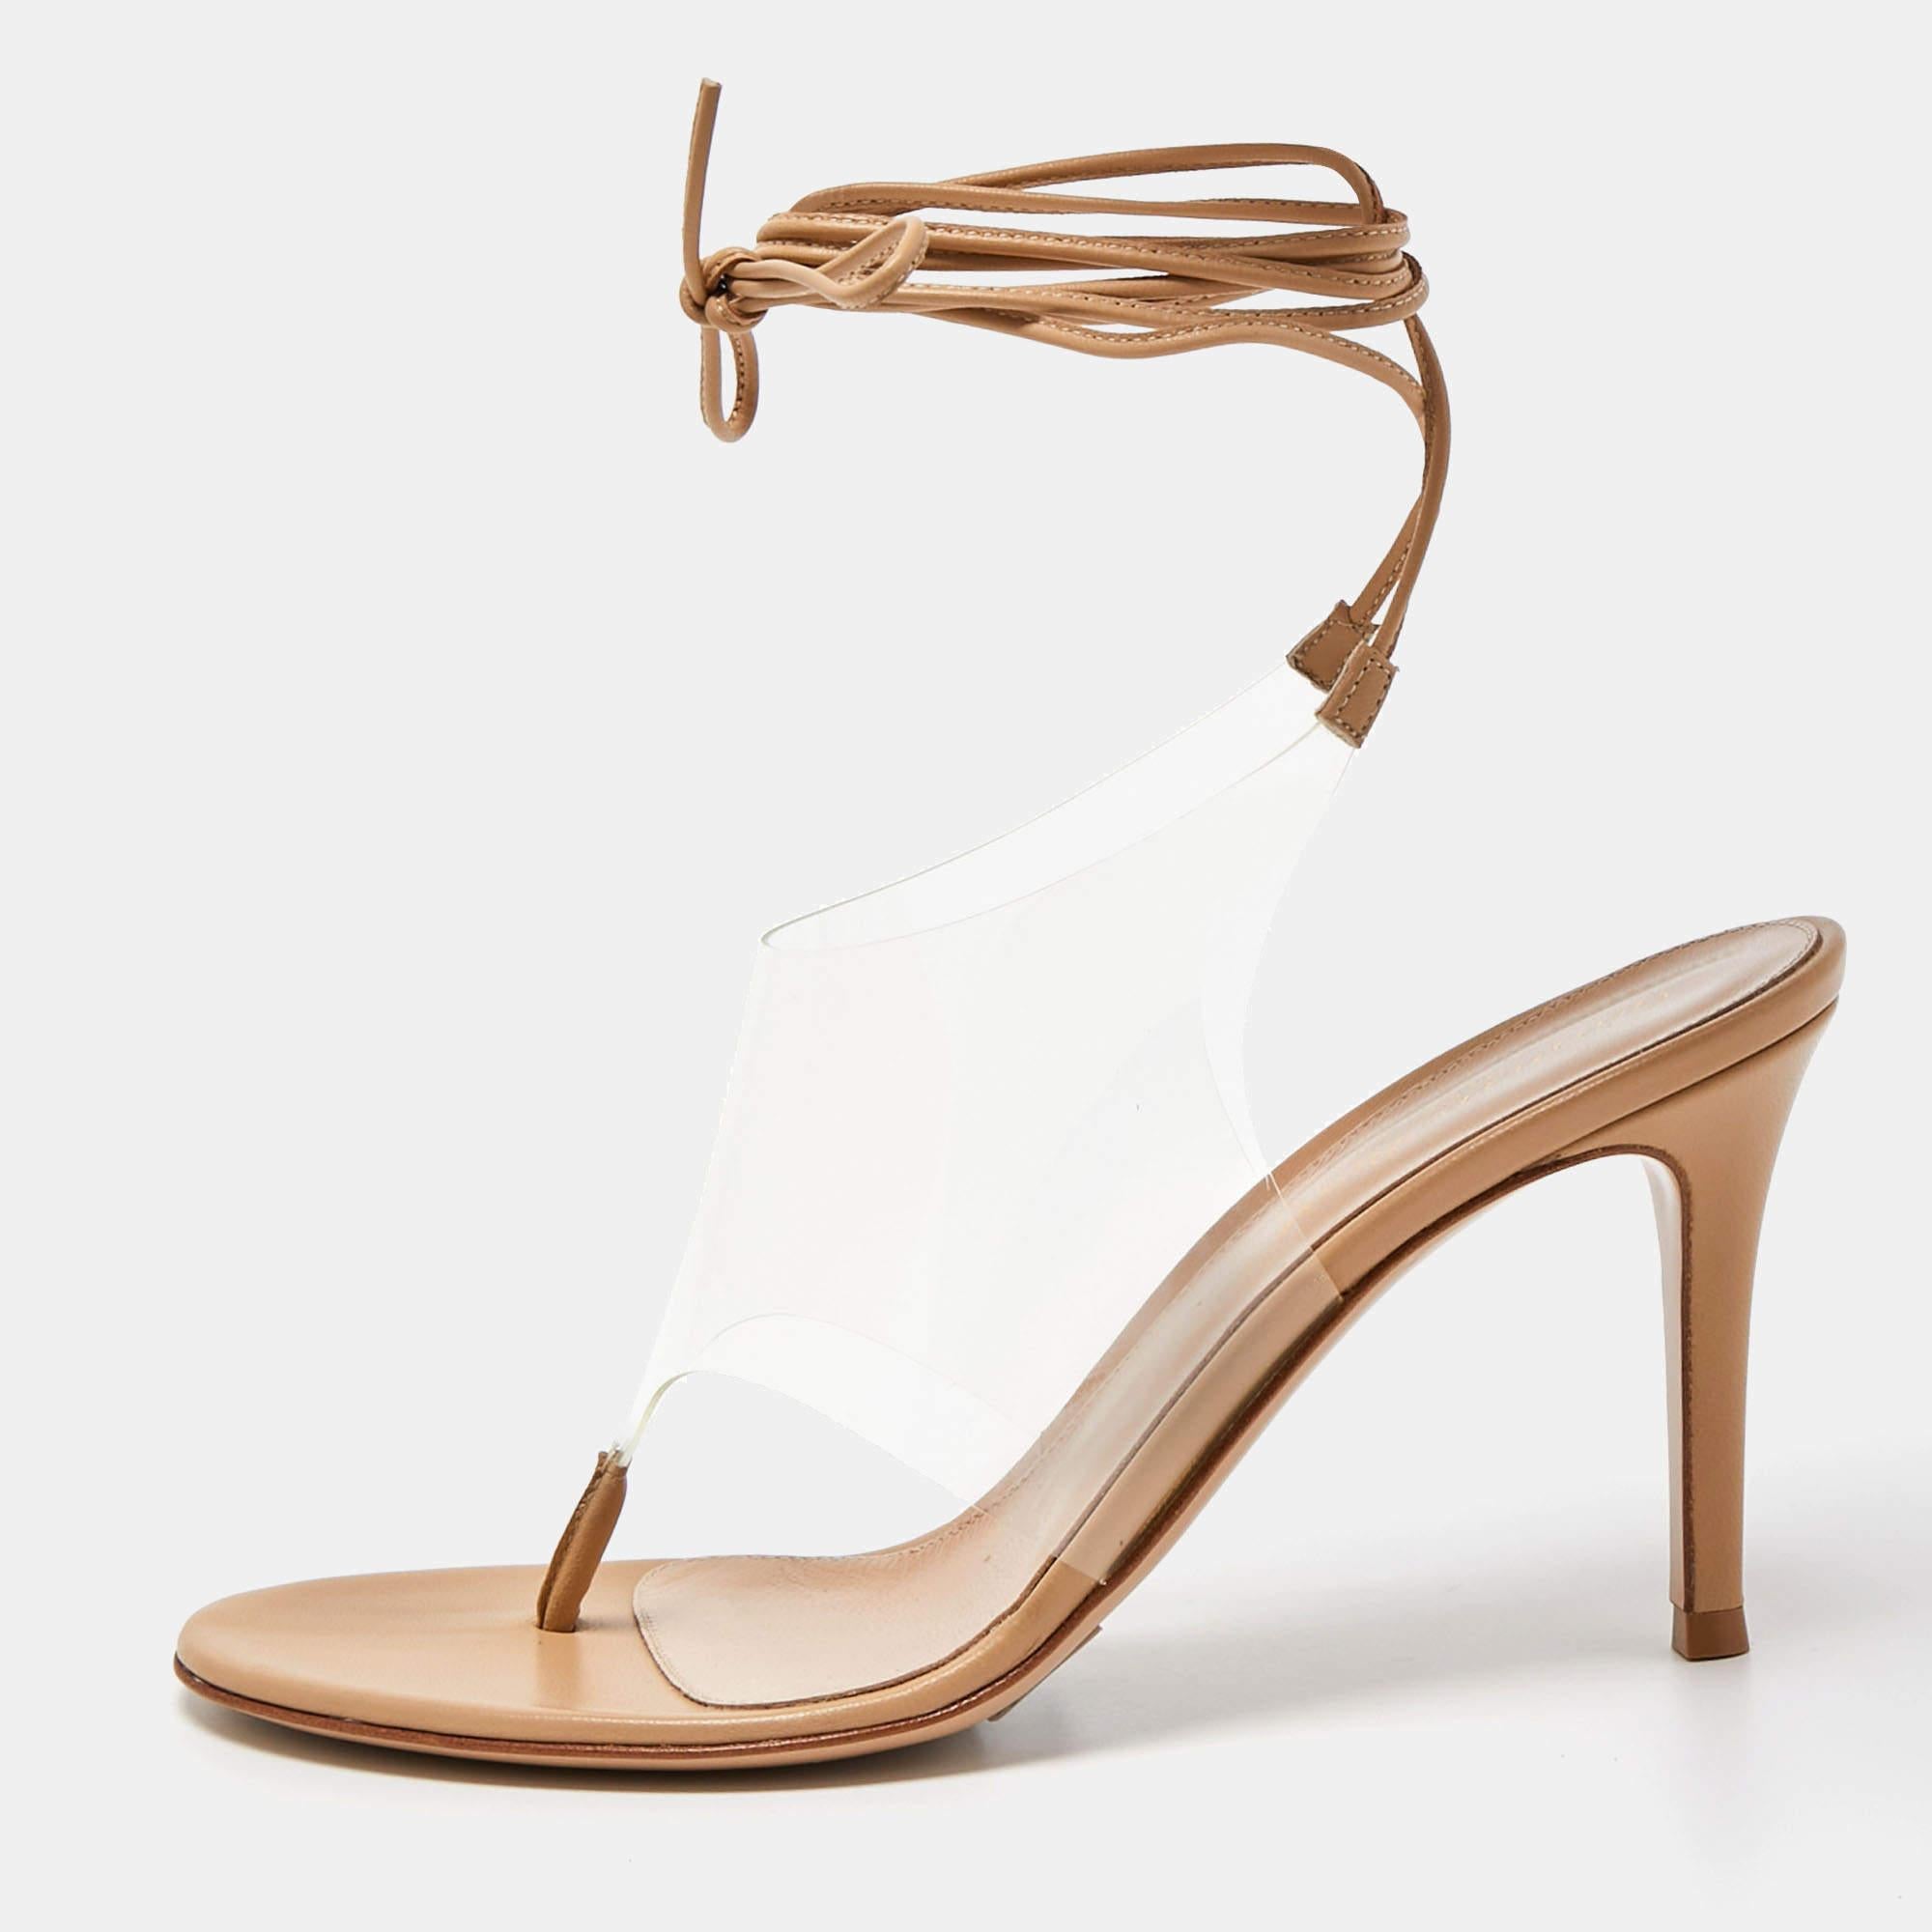 Gianvito Rossi Beige Leather and PVC Ankle Wrap Sandals Size 36 1